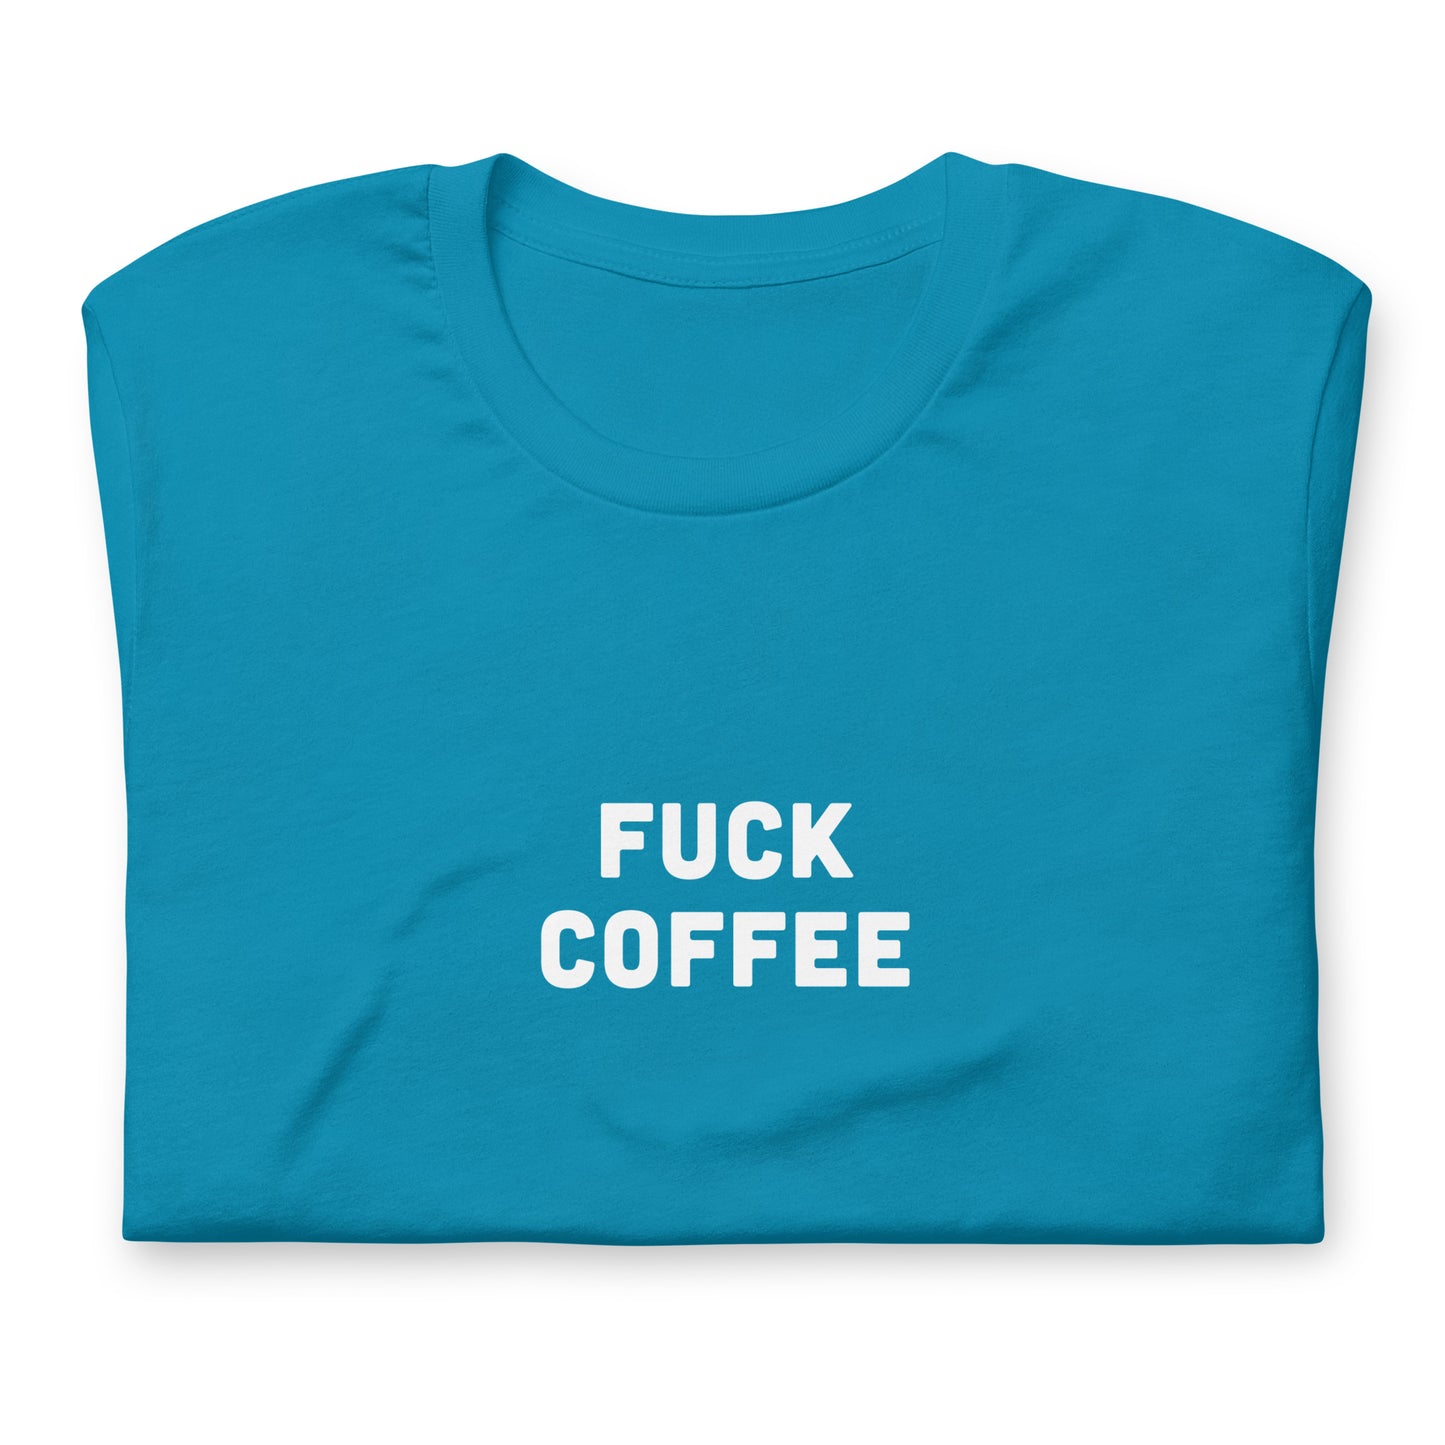 Fuck Coffee T-Shirt Size M Color Navy